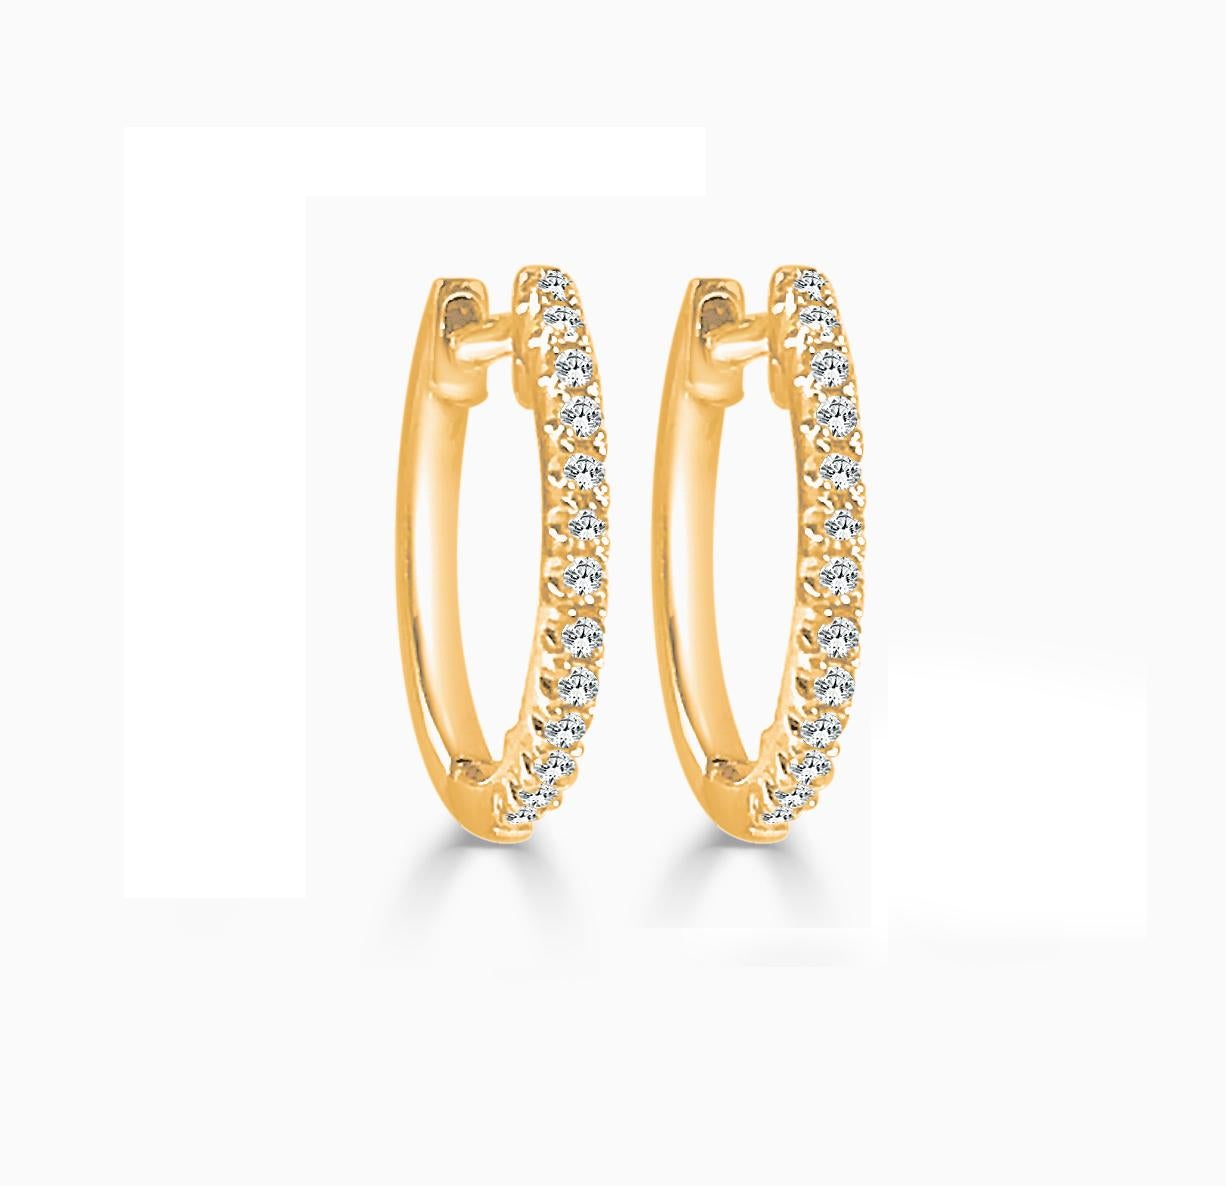 Simple yet stunning, these Diamond huggie hoops are crafted from 14k gold with 13 glittering white 0.09ct of diamonds. Each delicate U-shaped hoop features a single line of white diamonds, pave-set across the face in a gorgeous display. 1/2